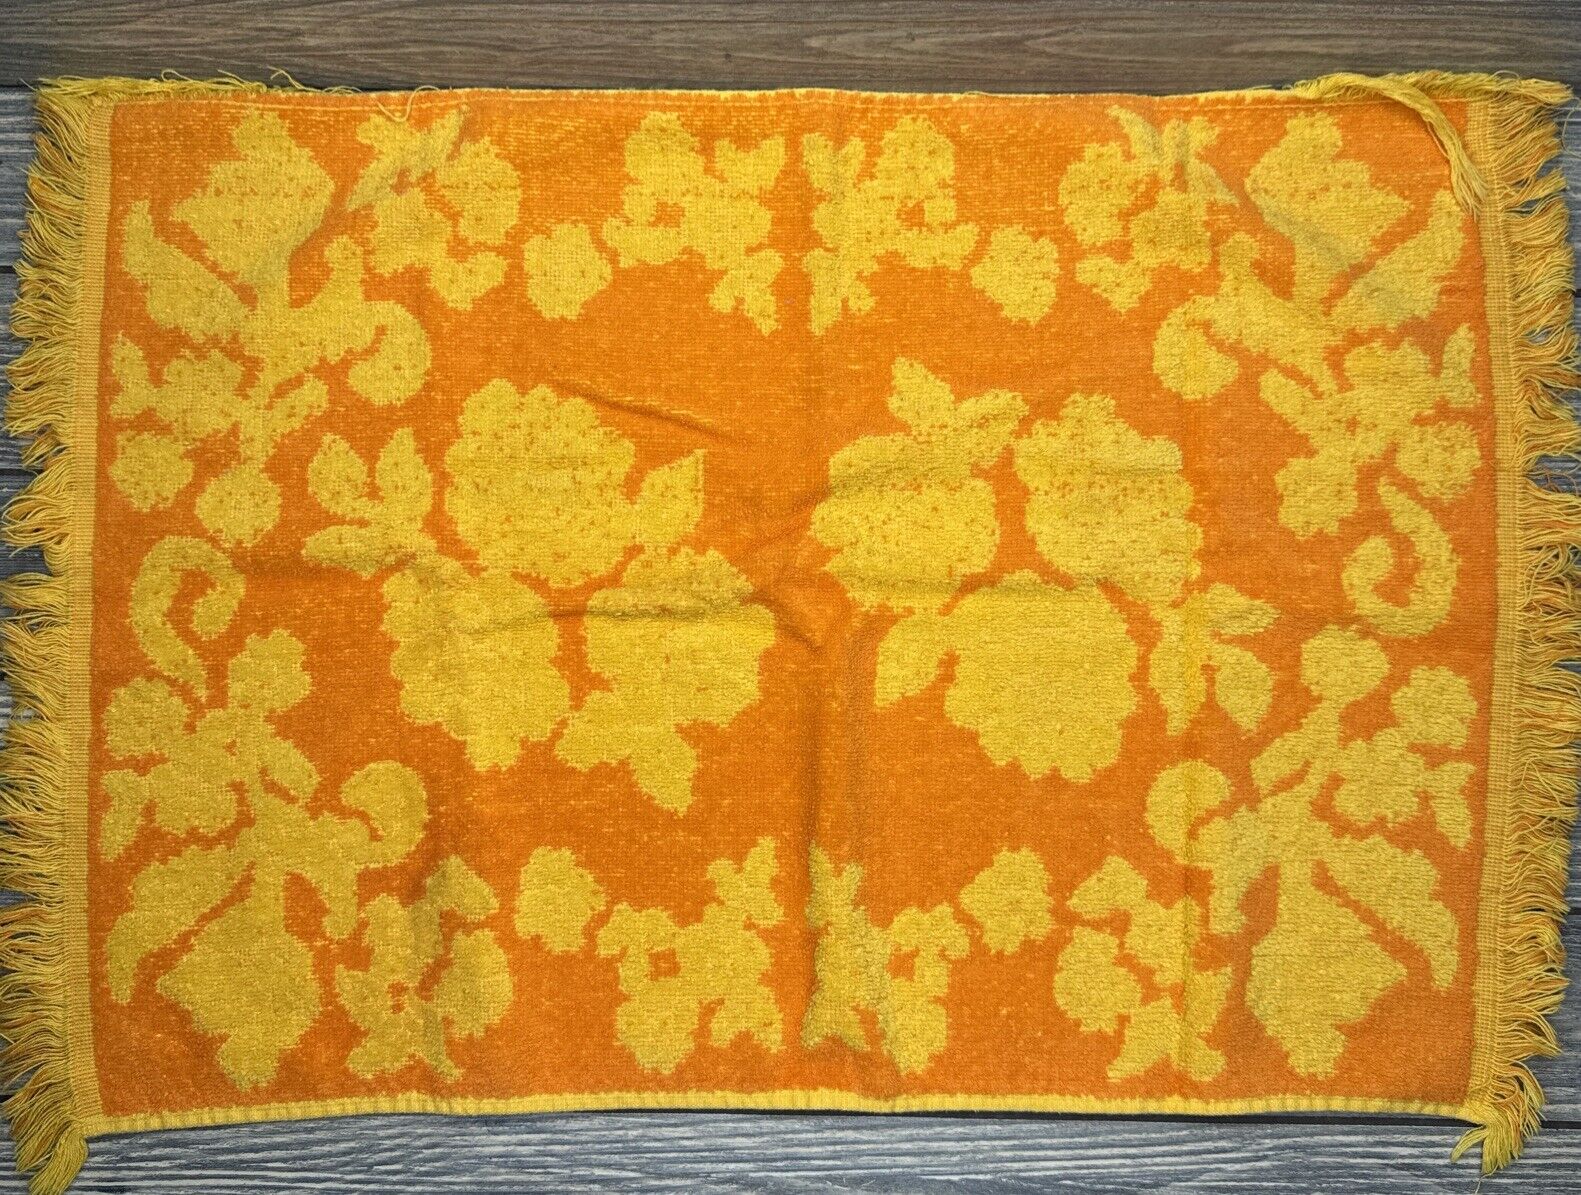 Vtg Cannon Monticello Cotton Hand Dish Towel Orange With Yellow Flowers 16x23”